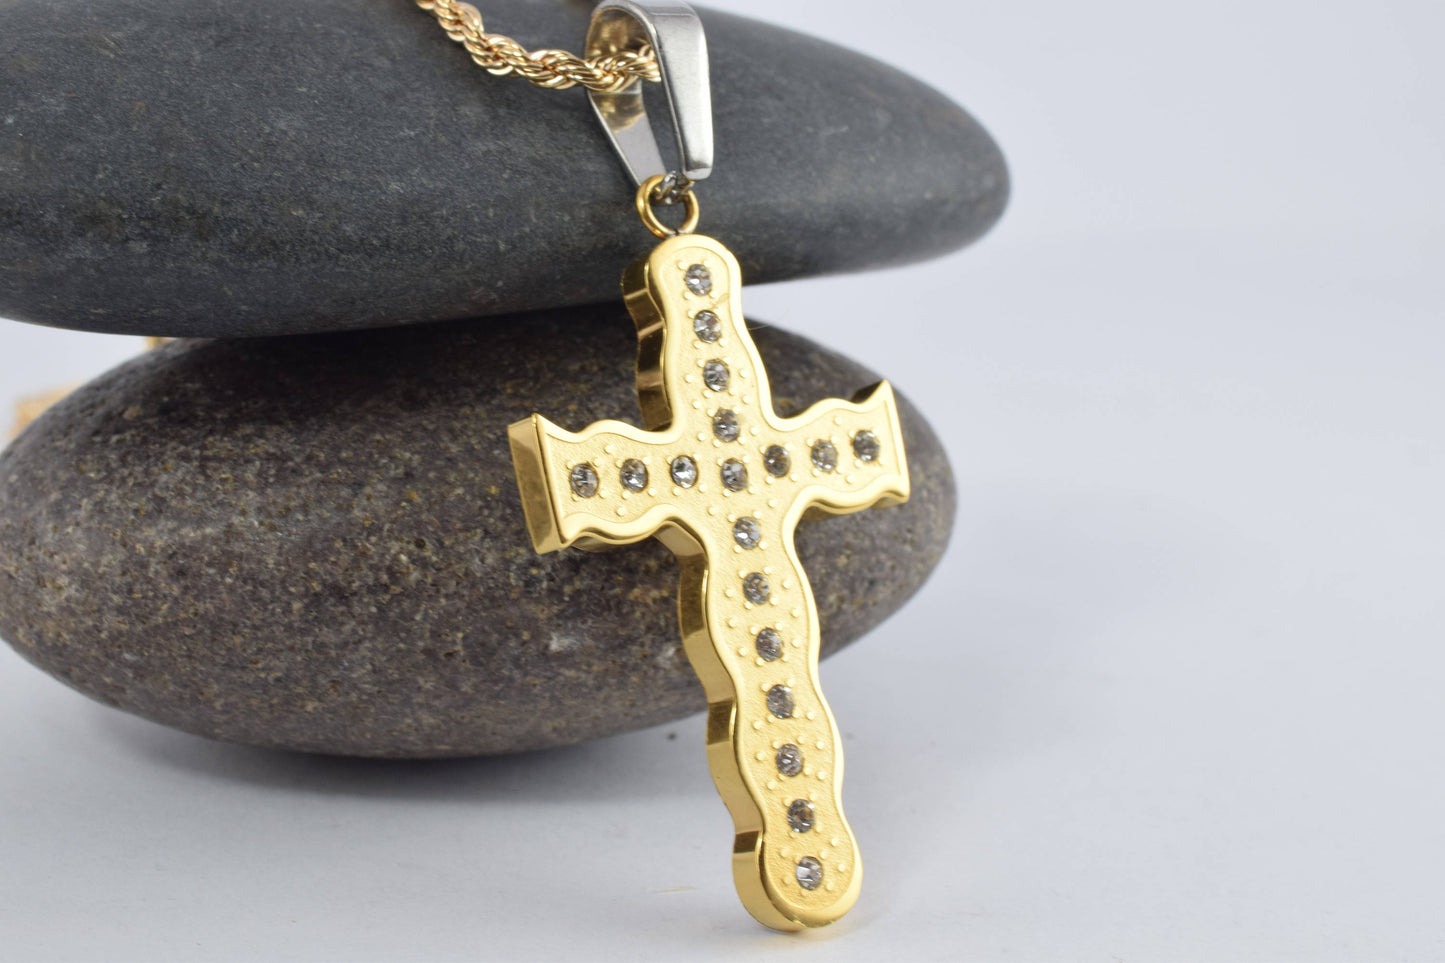 18K Gold Filled Cross Stainless Steel Pendants Cubic Zirconia Size 44x25mm, Christian Religious Charm Communion Baptism For Jewelry Making